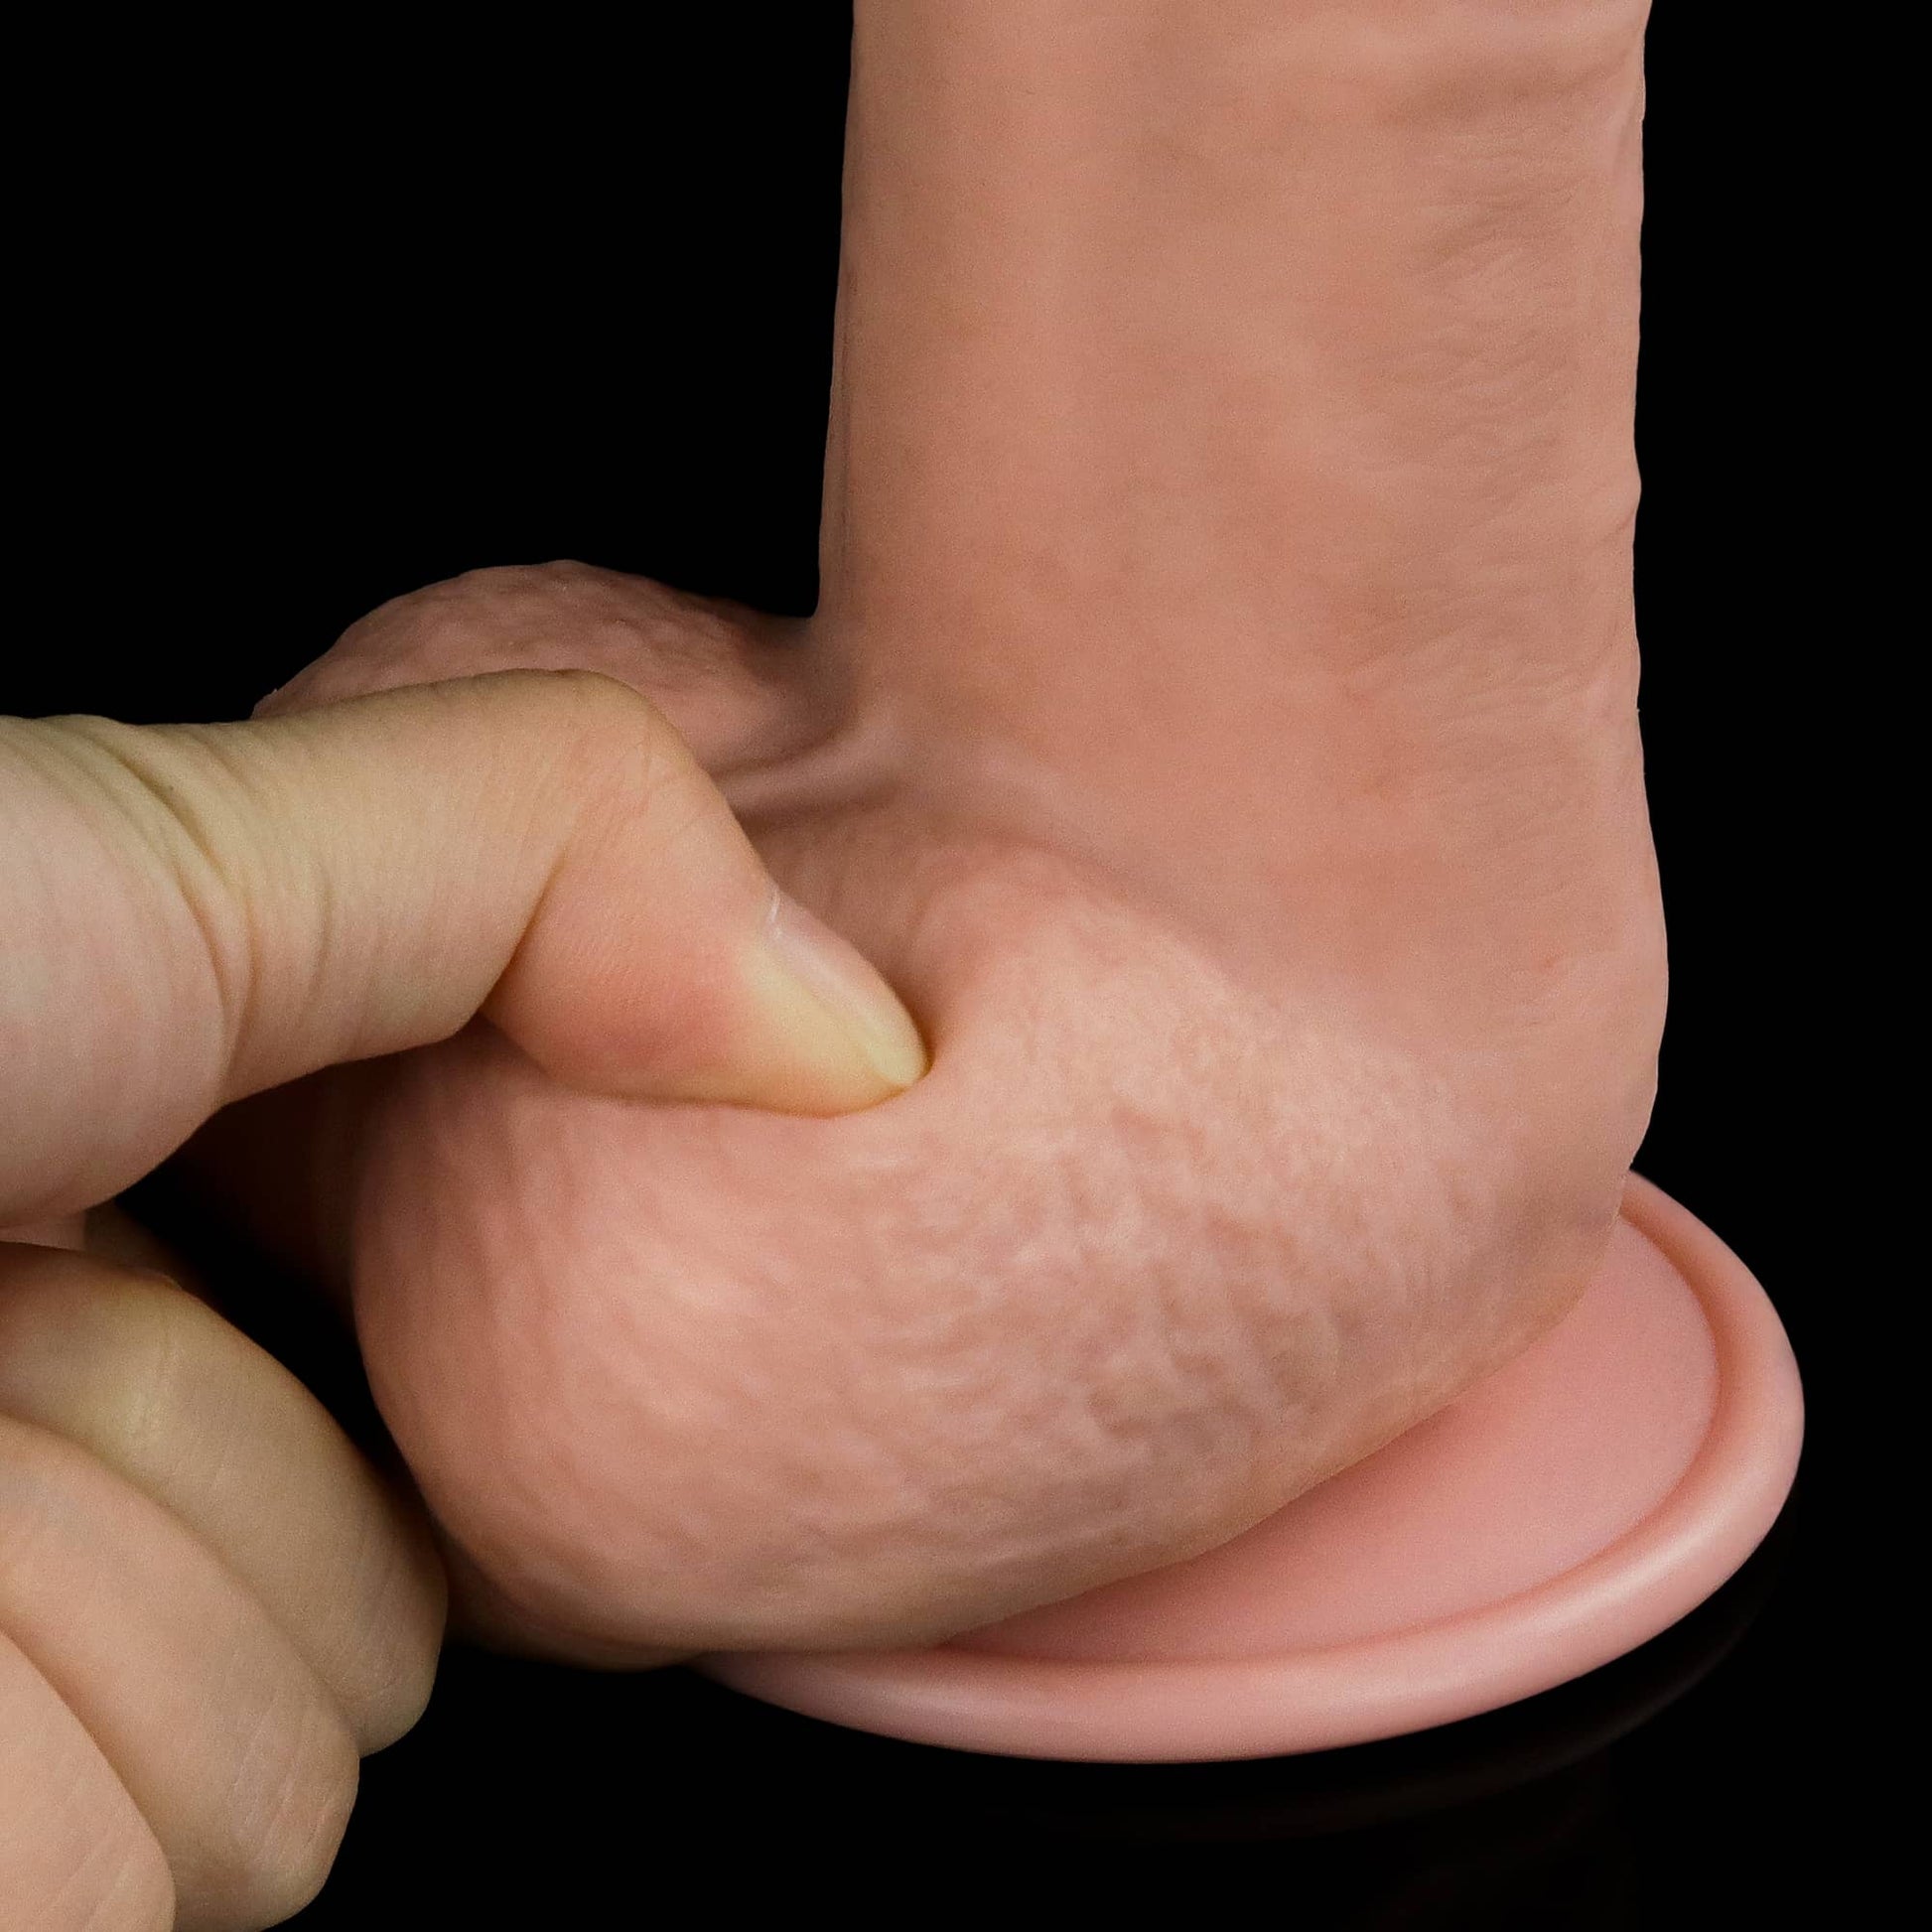 The soft testicle of the 9 inches realistic sliding skin suction cup dildo